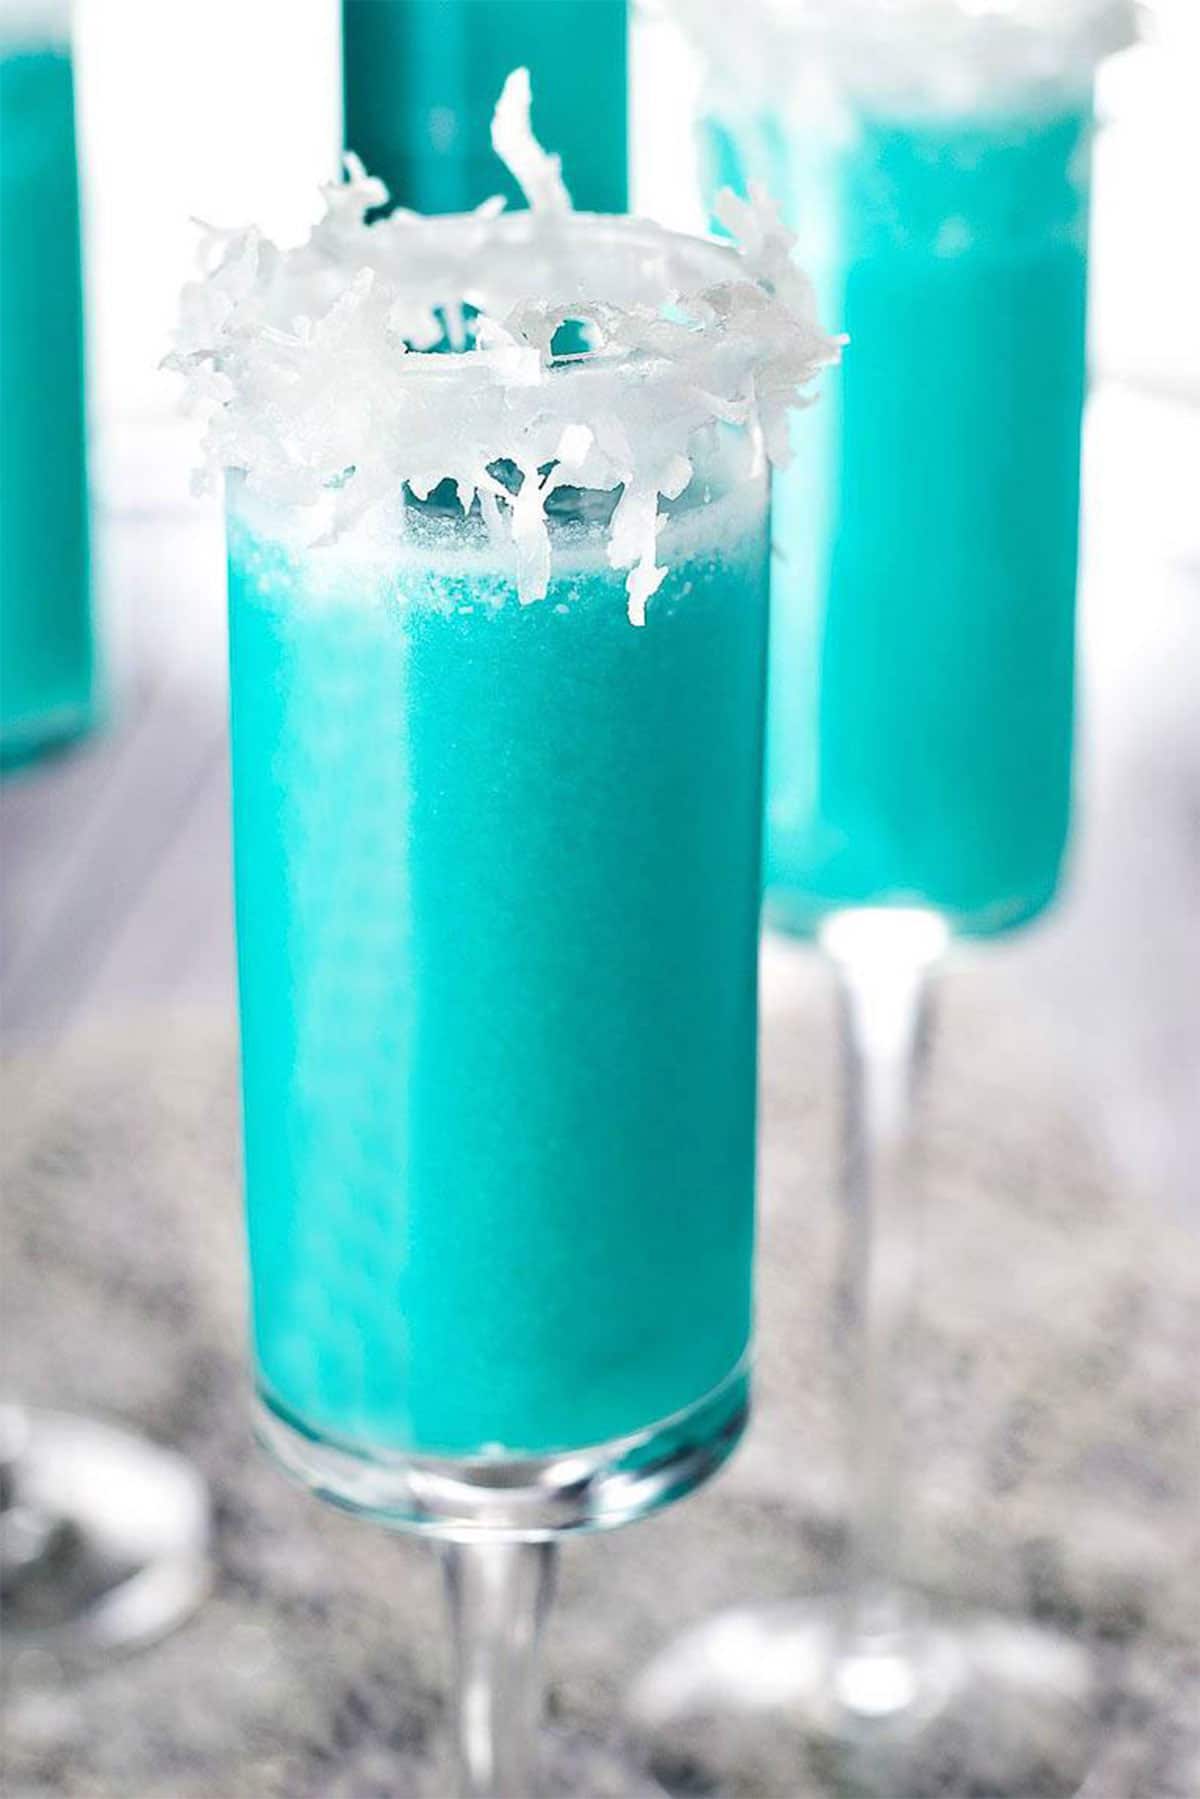 Jack Frost holiday Christmas candy cocktails